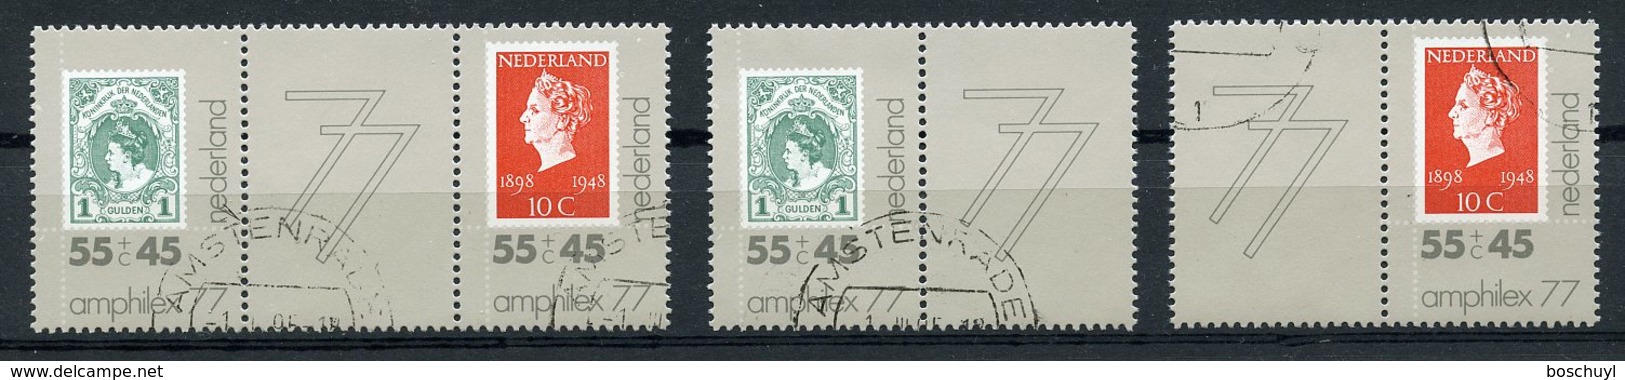 Netherlands, 1977, Amphilex Stamp Exhibition, Combinations From Sheet, Used, Michel 1101, 1104 - Usati